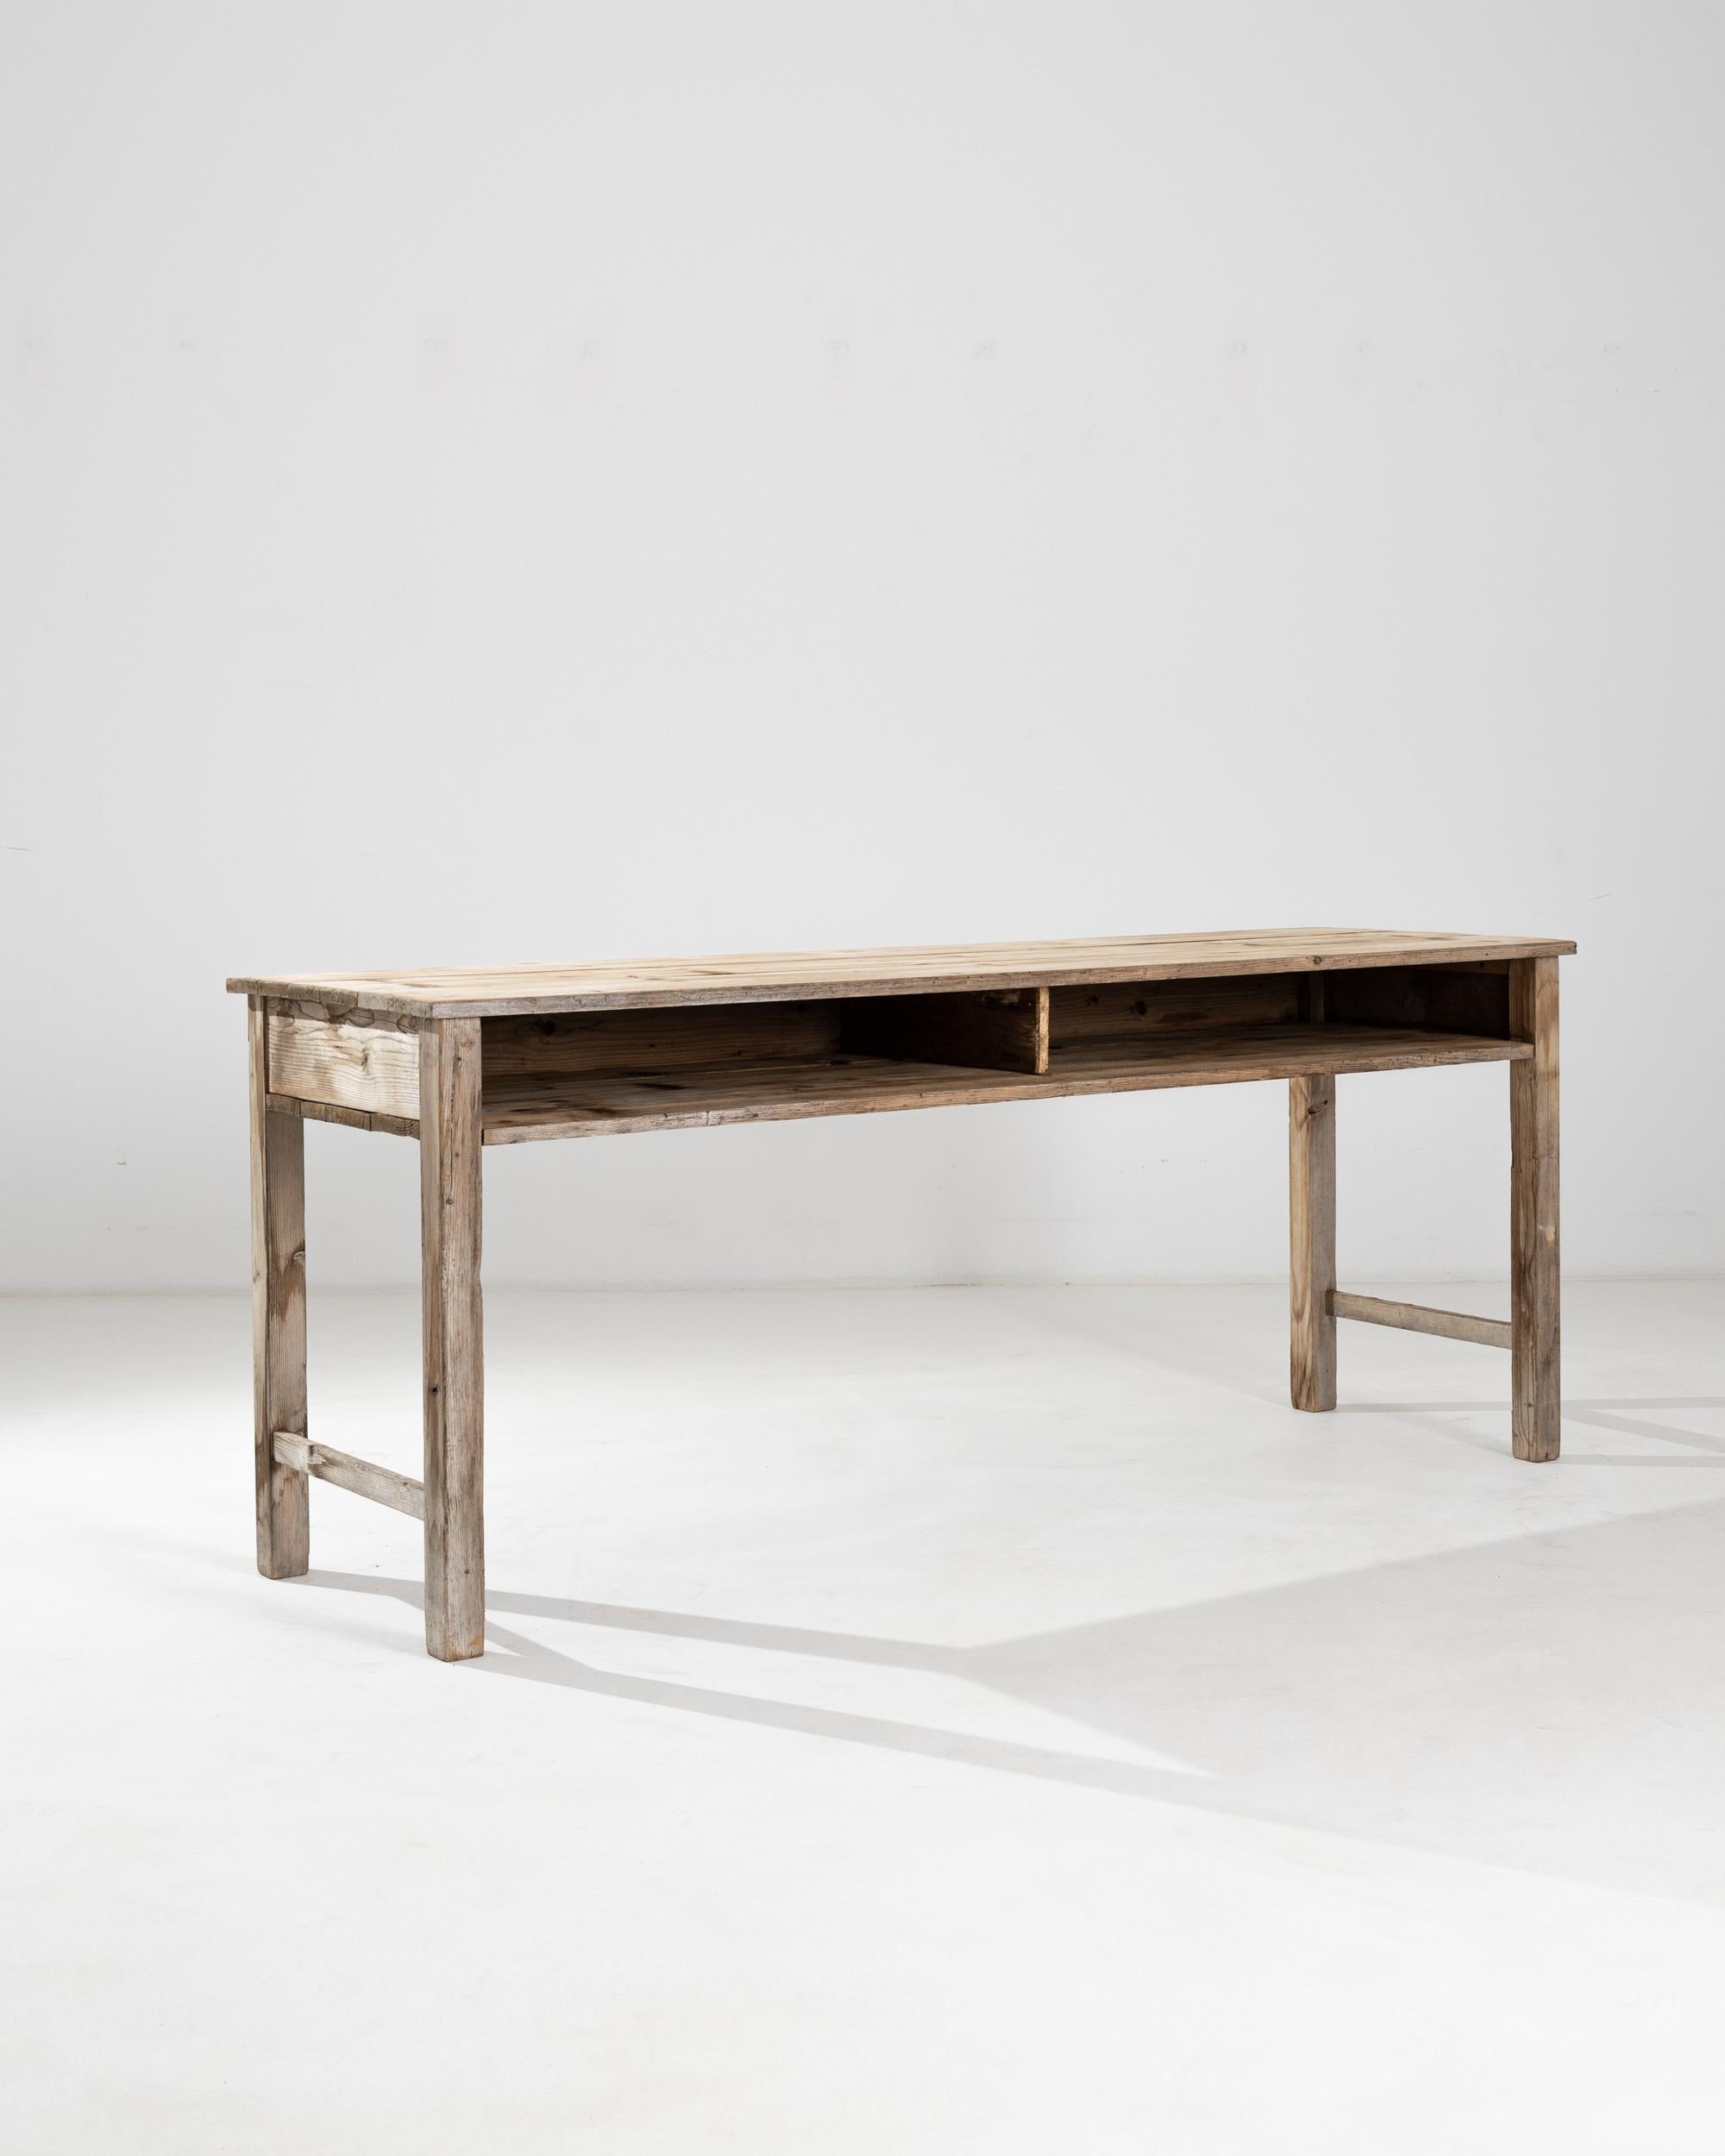 A rustic design in natural wood gives this vintage table an appealing simplicity. Made in Central Europe at the turn of the century, the form indicates that this piece was one used as a shop counter or teacher’s table —two deep niches underneath the